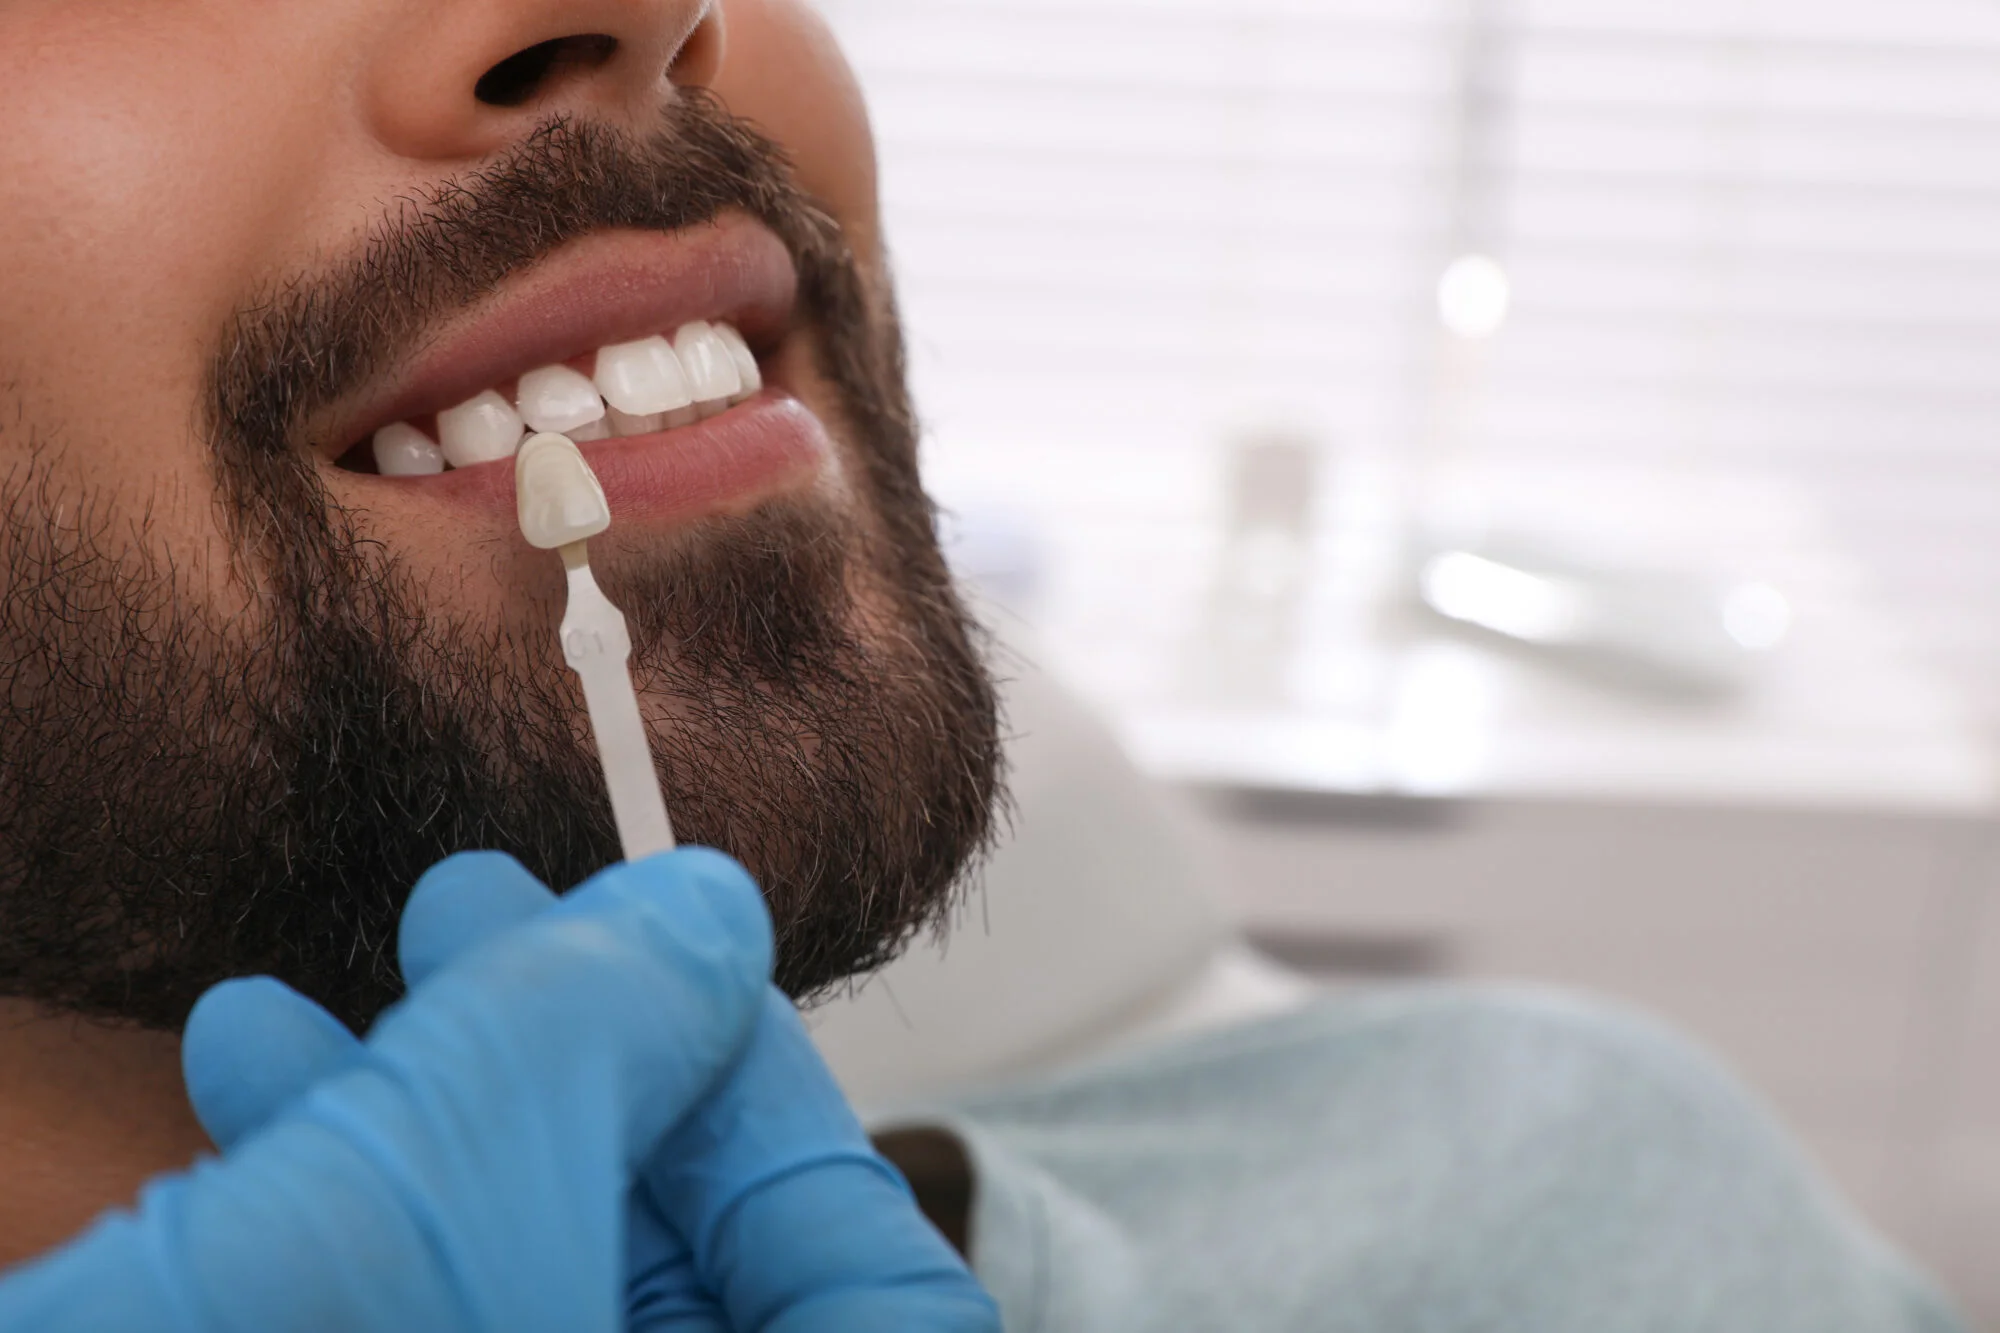 What Is Restorative Dentistry